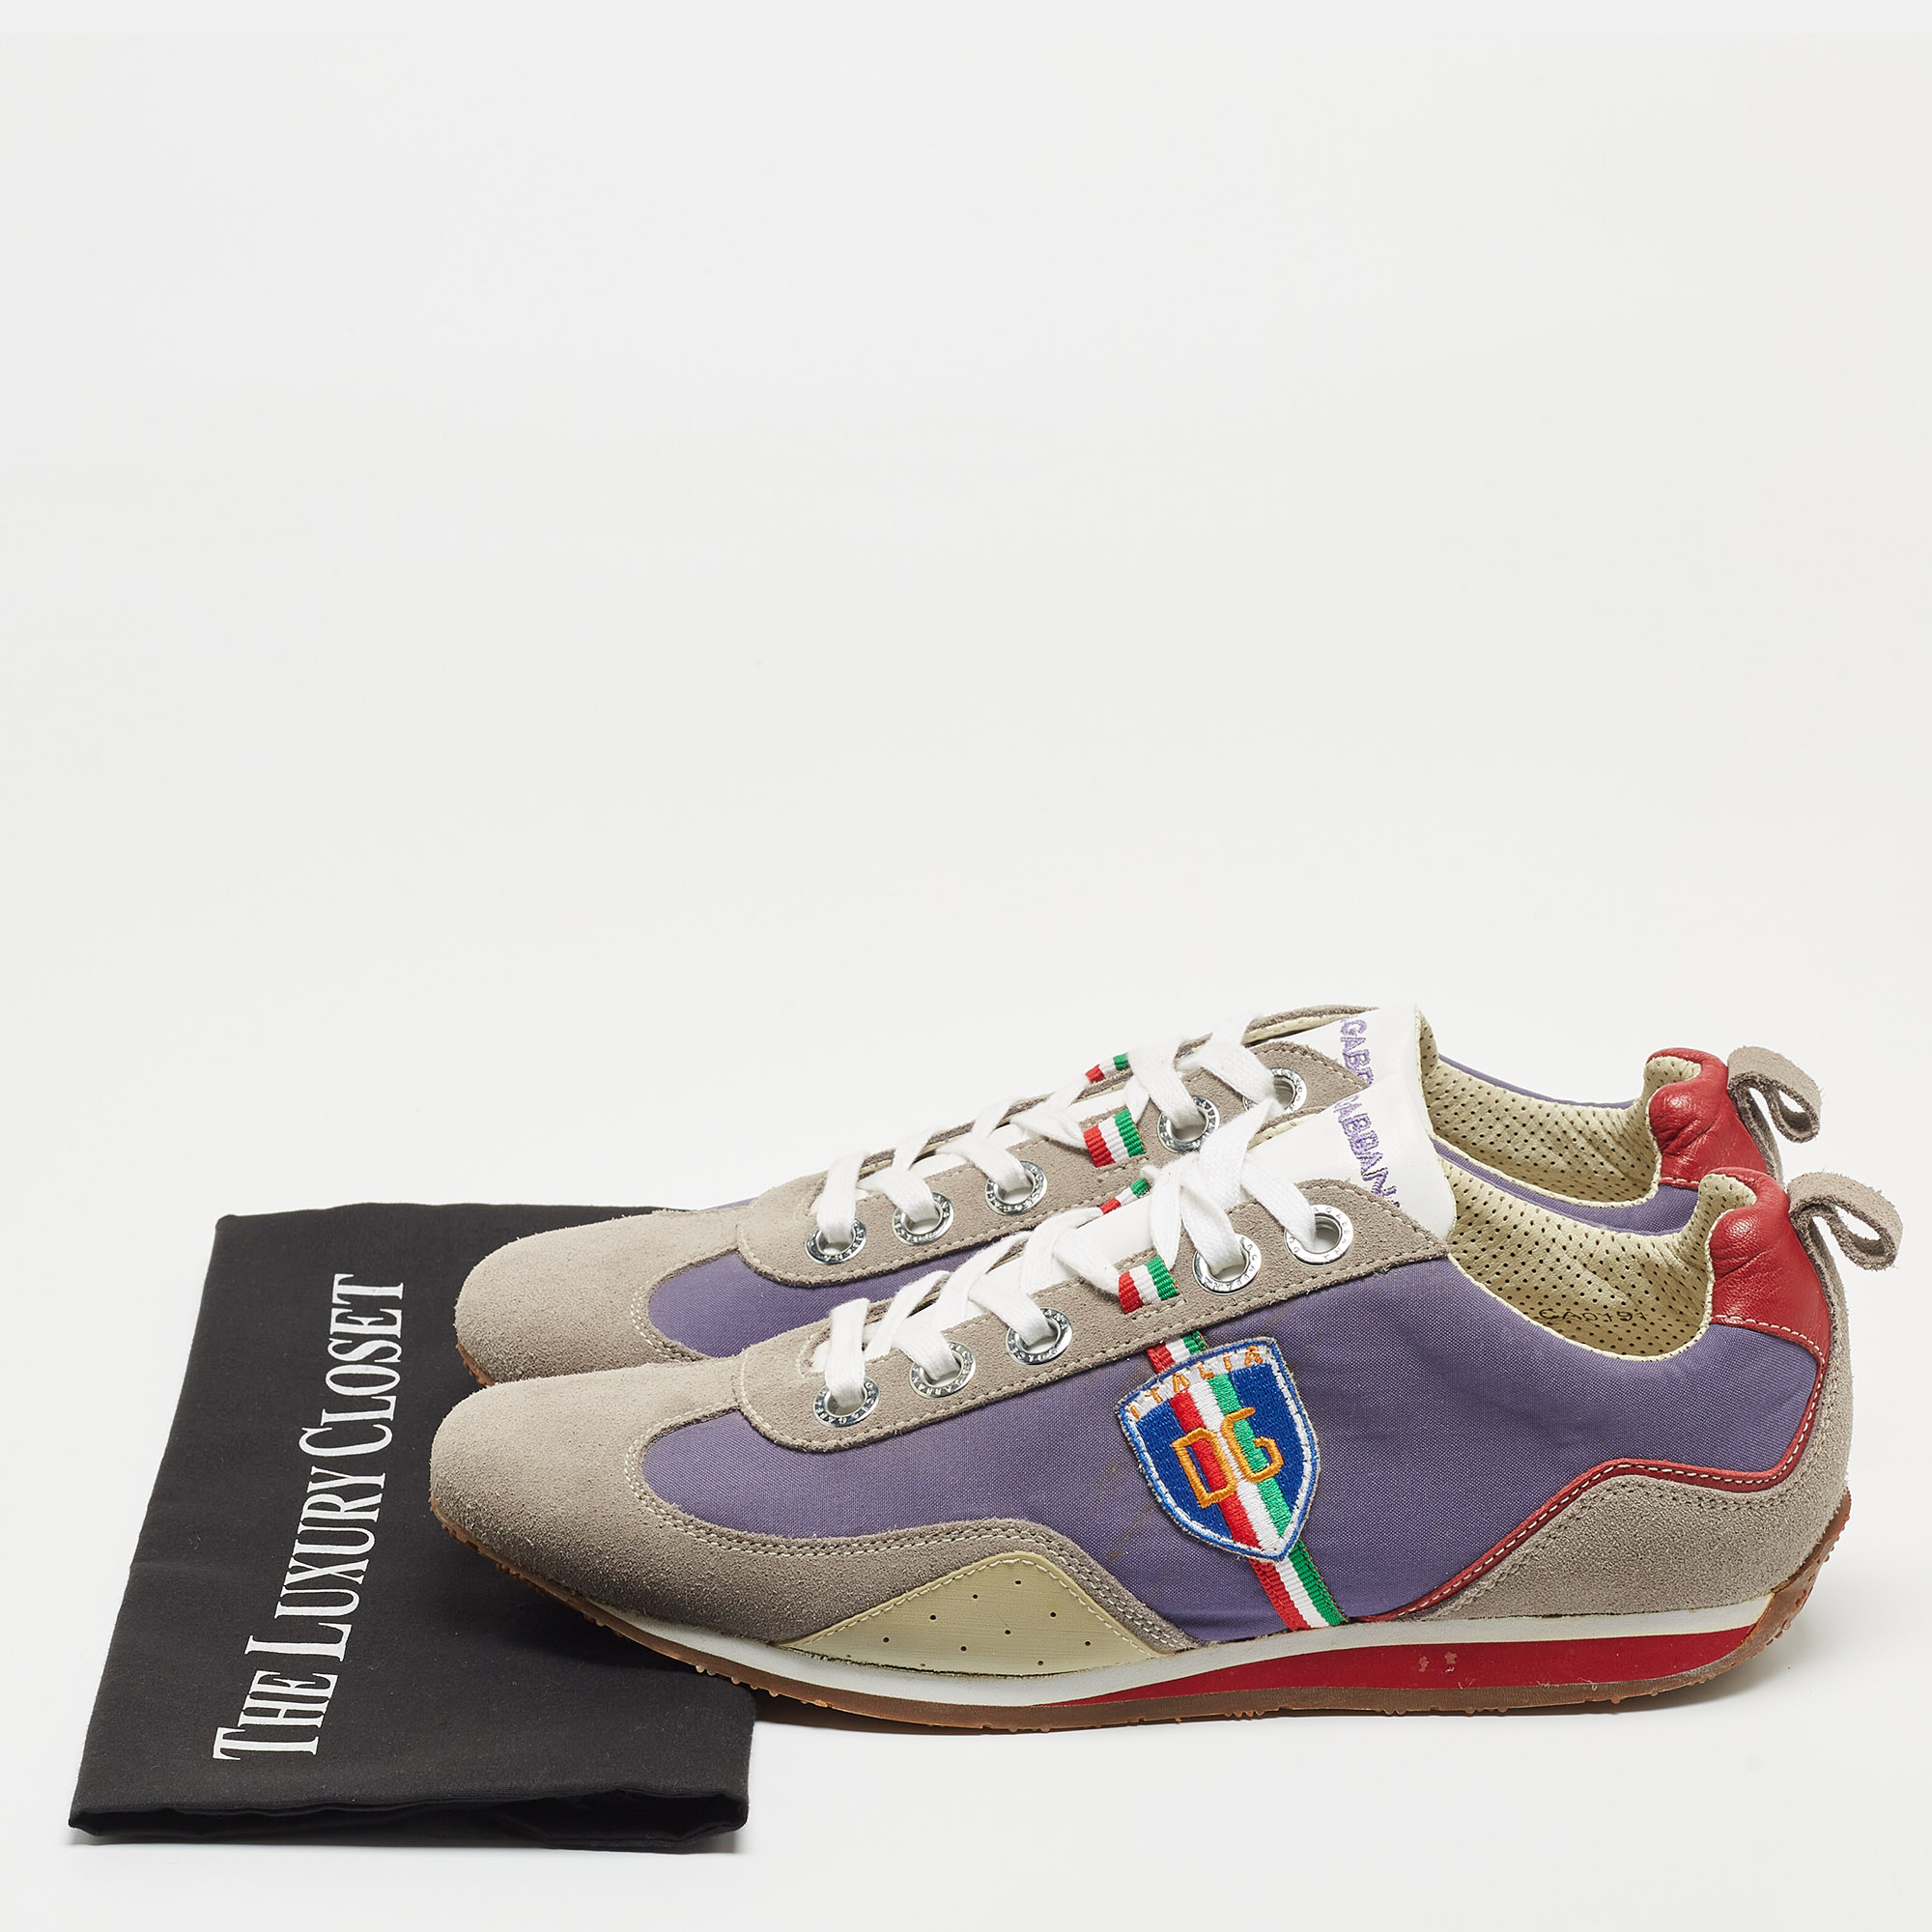 Dolce & Gabbana Multicolor Leather And Suede Low Top Sneakers Size 44.5